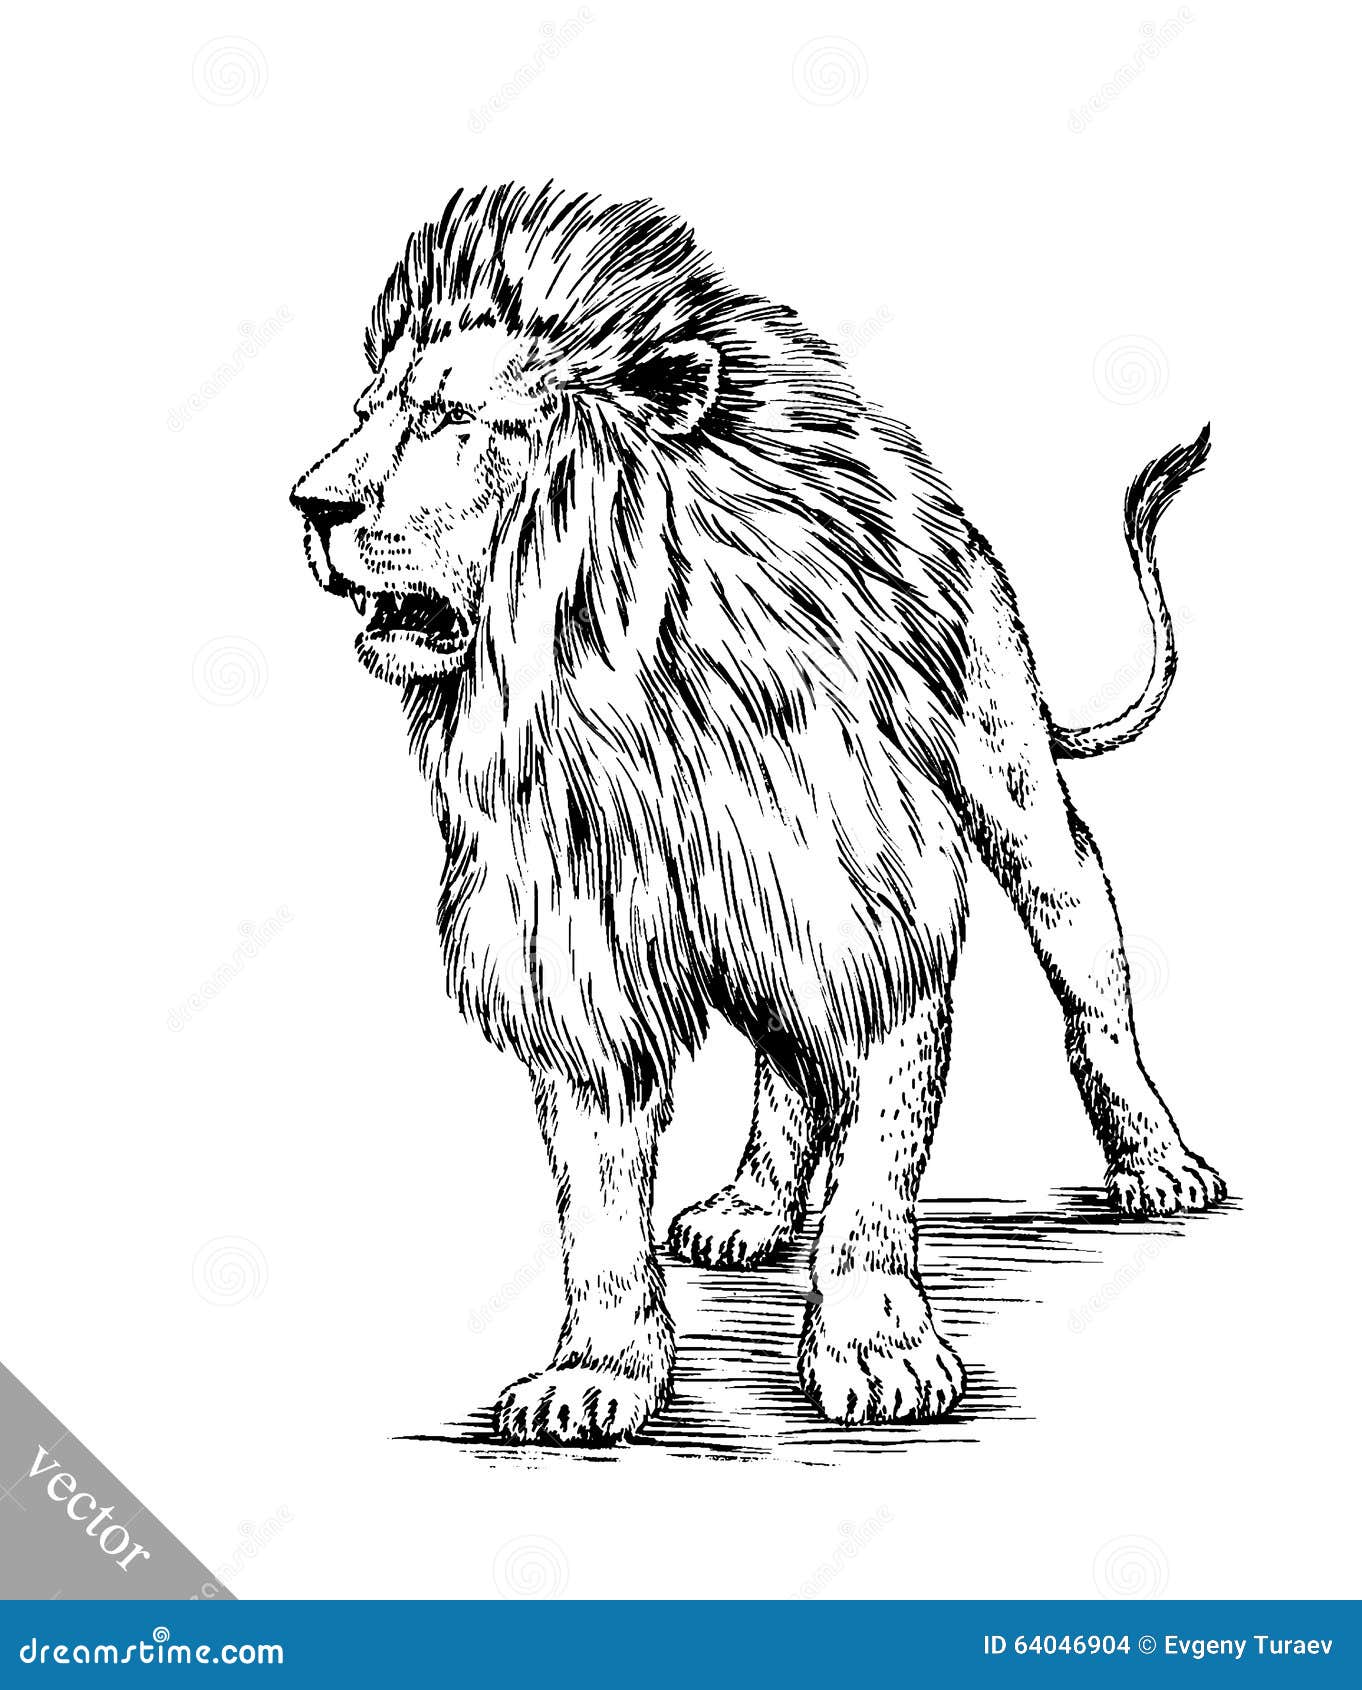 Brush Painting Ink Draw Isolated Lion Illustration Stock Vector ...